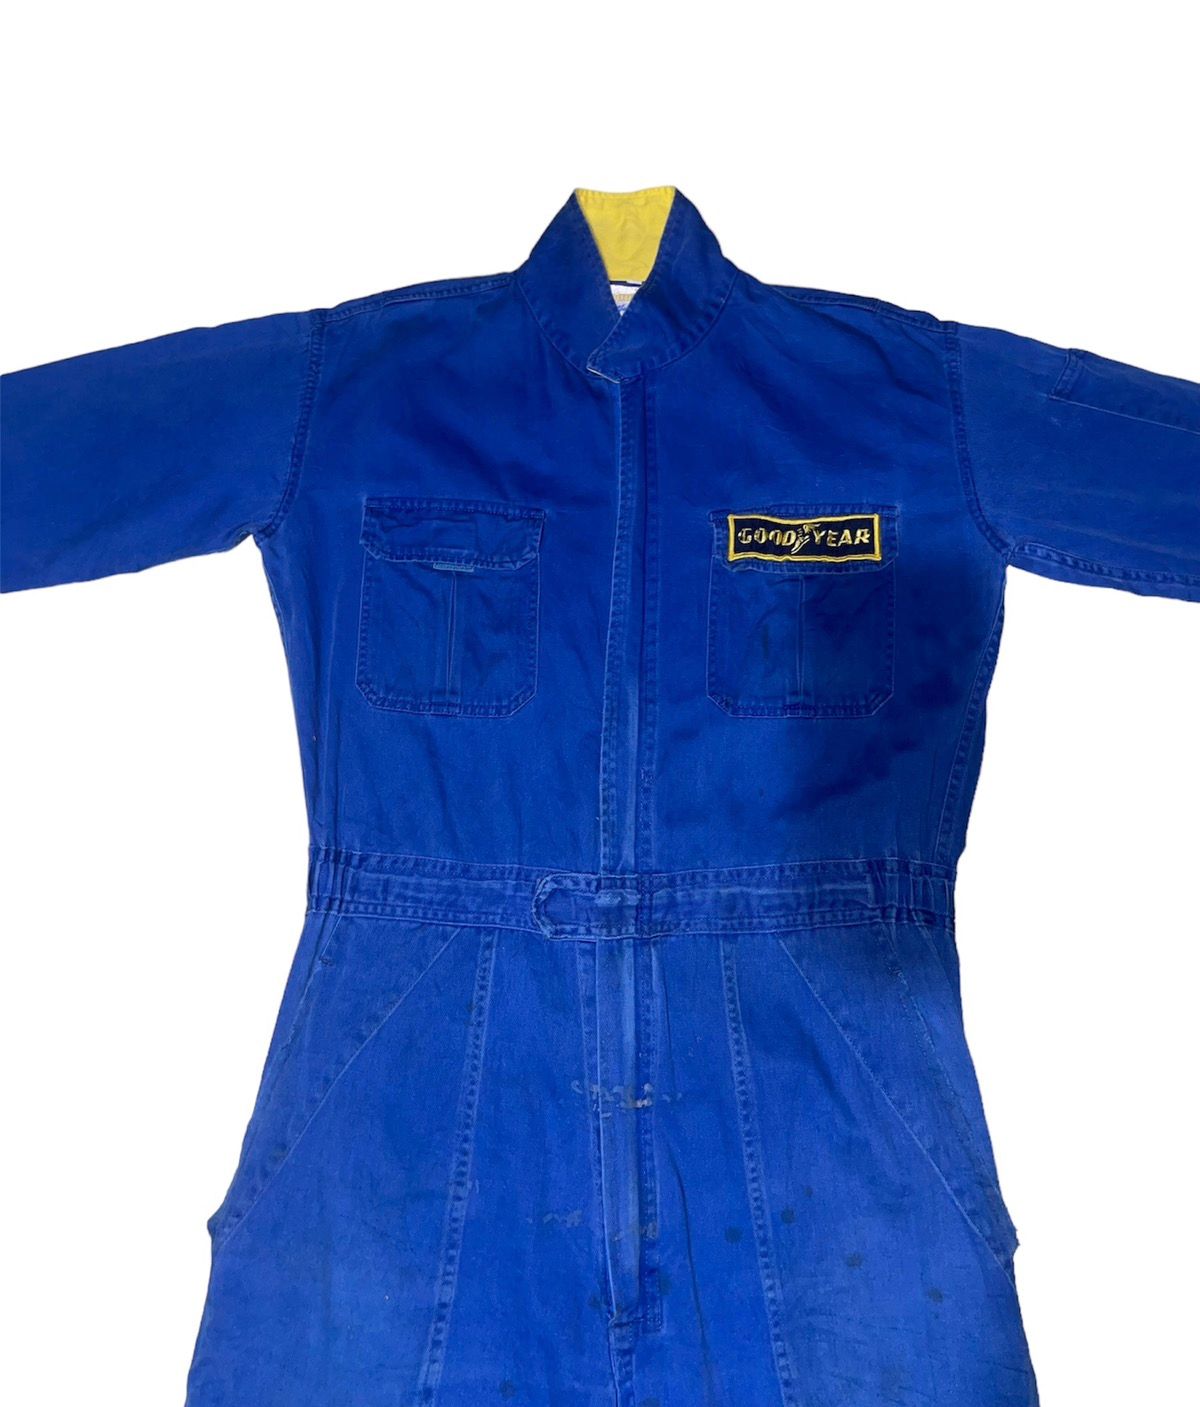 VINTAGE GOOD YEAR RACING OVERALL JUMPSUIT - 4